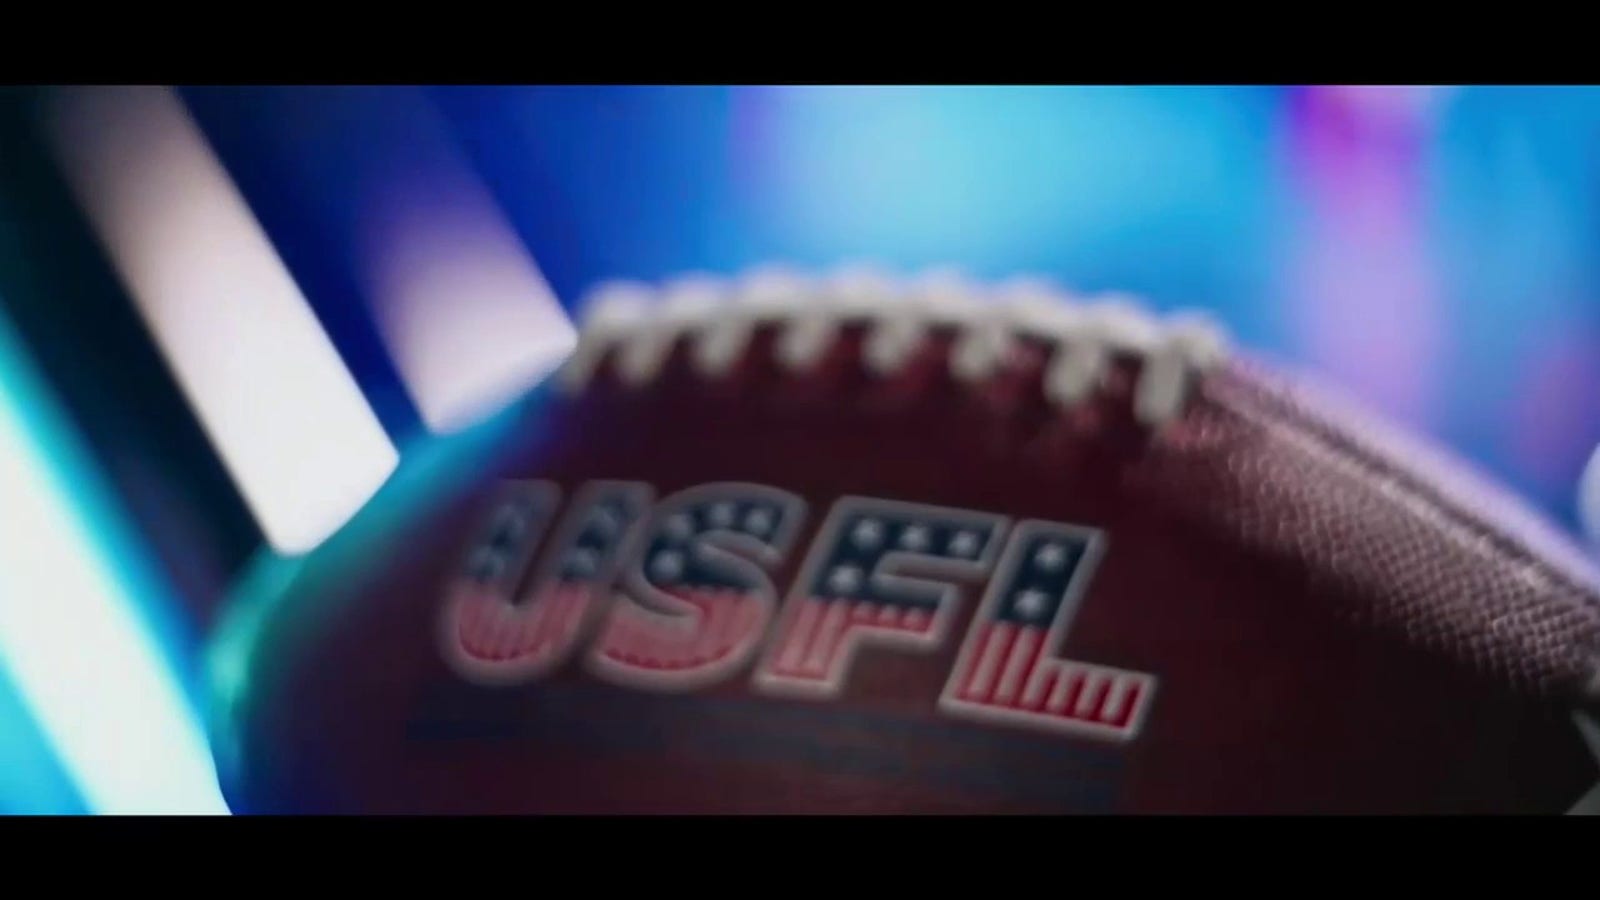 Get excited for the second season of the USFL that is officially underway!